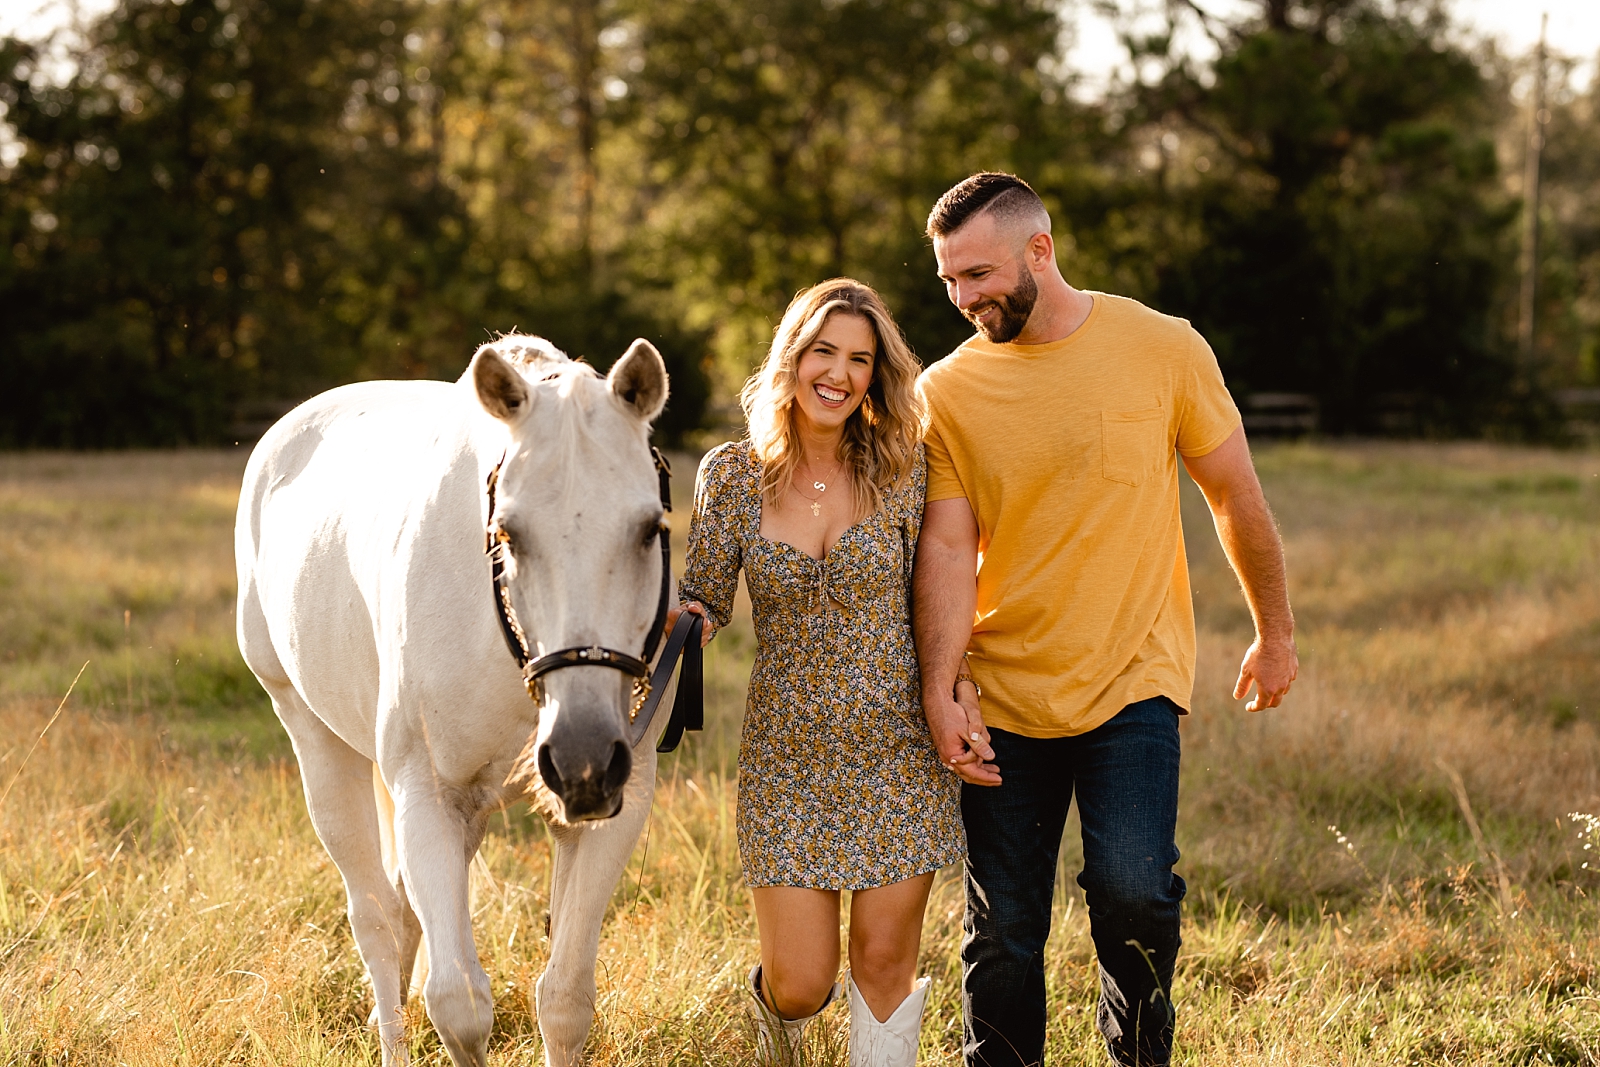 Equine photographer takes photos of couple with horse at sunset near Jacksonville FL